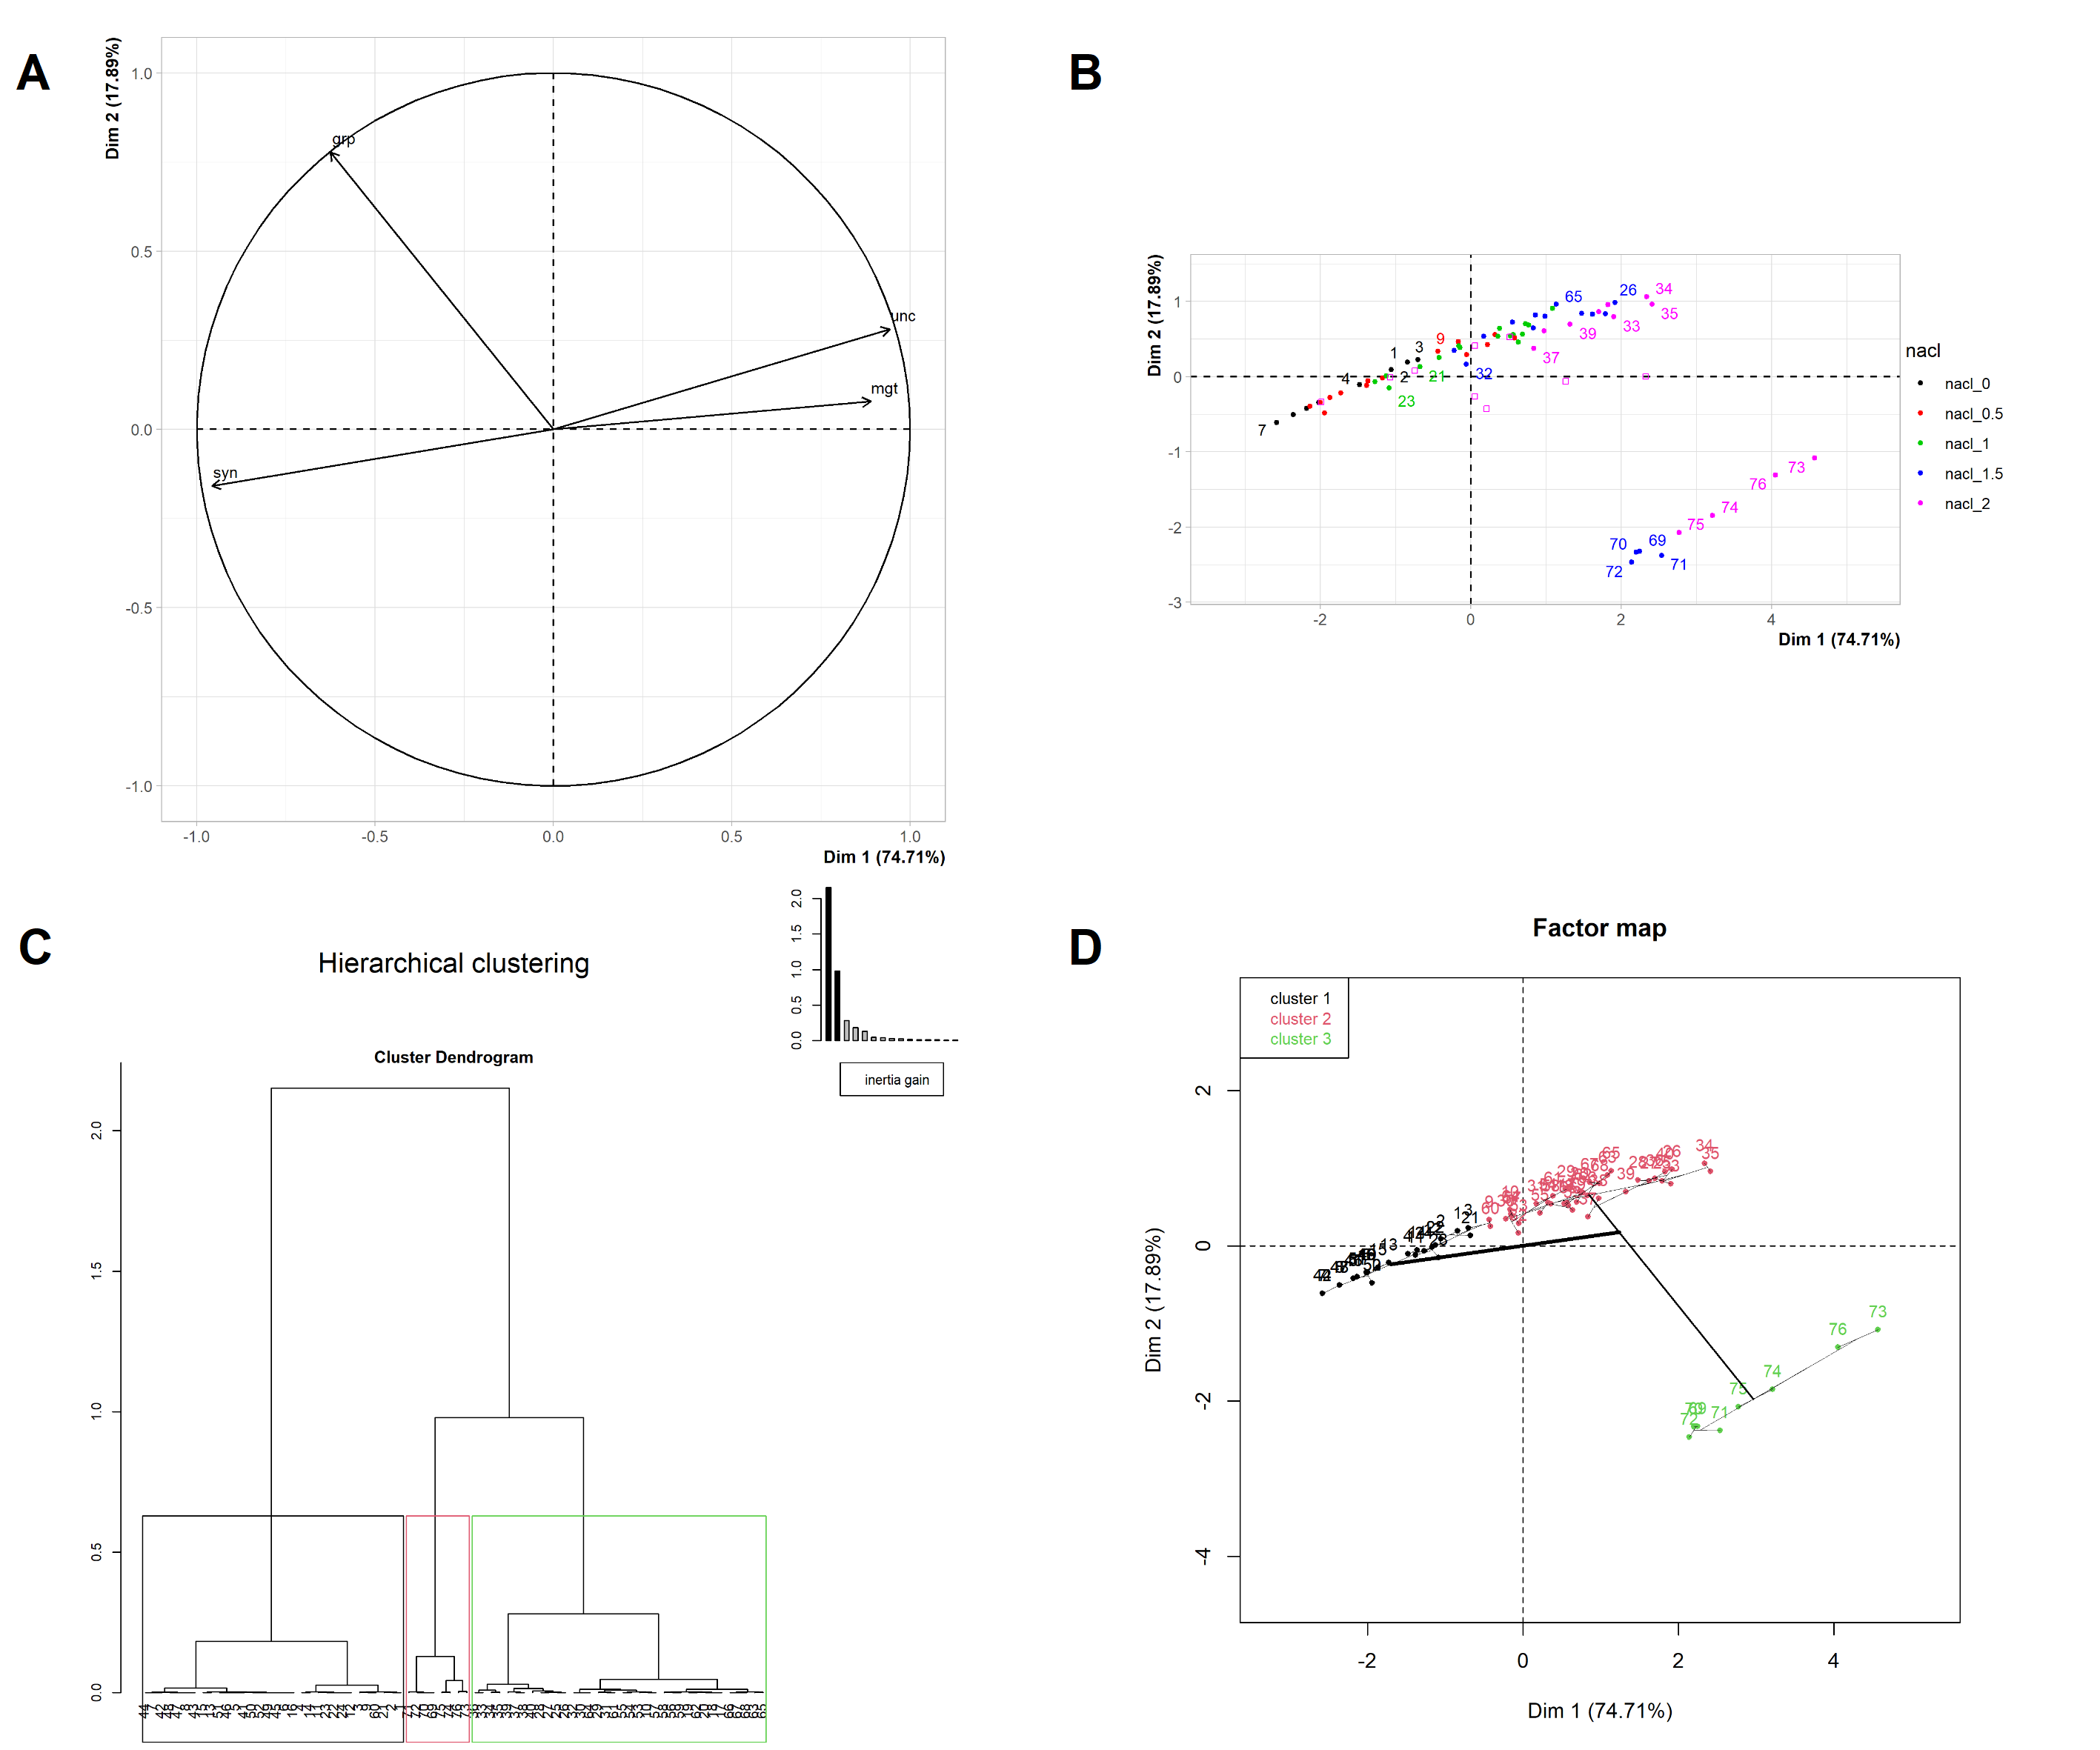 Multivariate Analysis:  Principal component Analysis and Hierarchical Clustering Analysis.